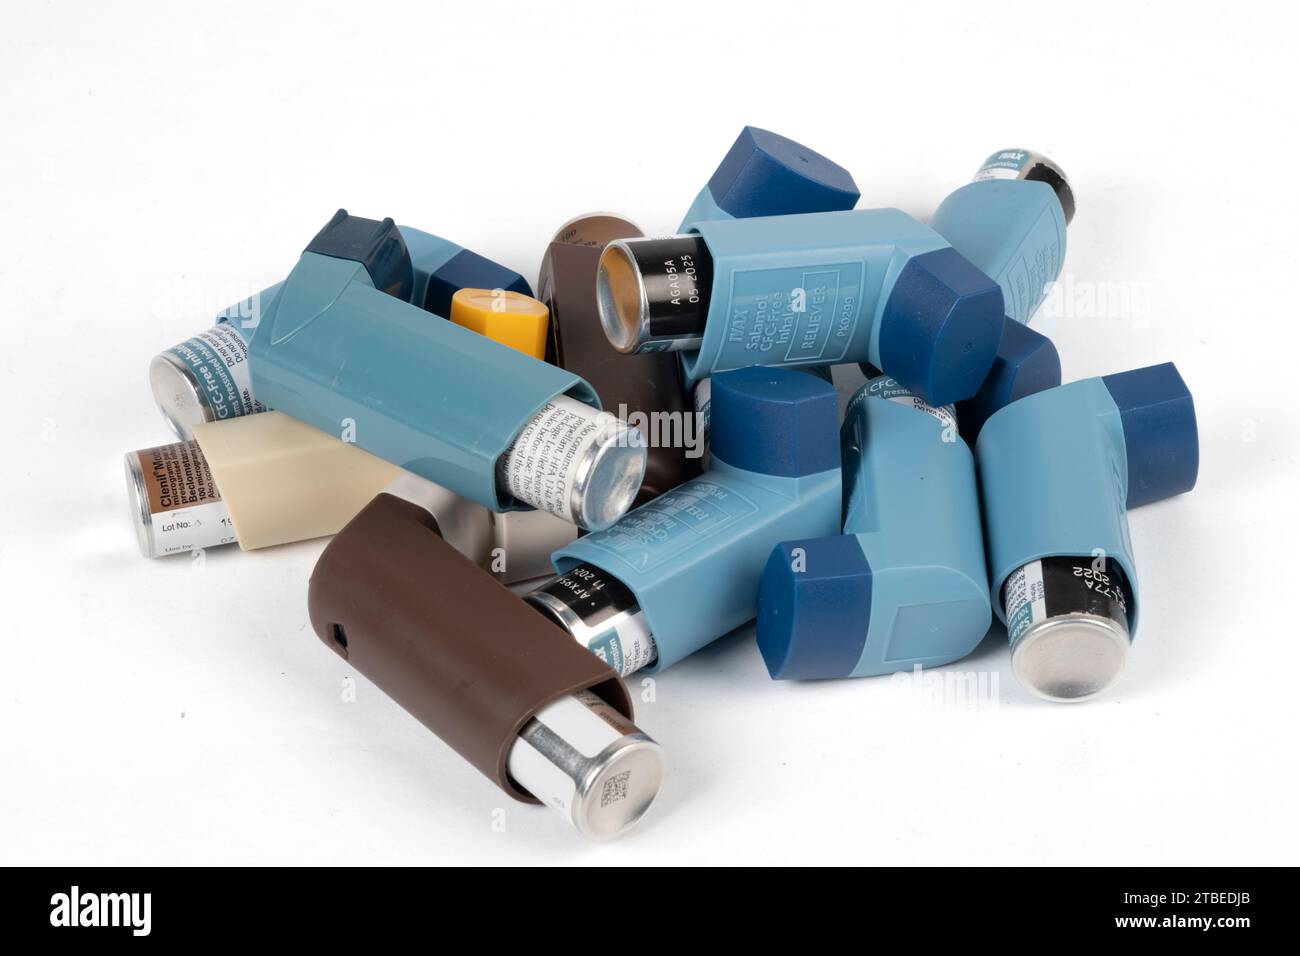 Pile of MDI (metered dosage inhalers) asthma inhalers considered undesirable for the environment and being replaced by DPI (dry powder inhaler) Stock Photo